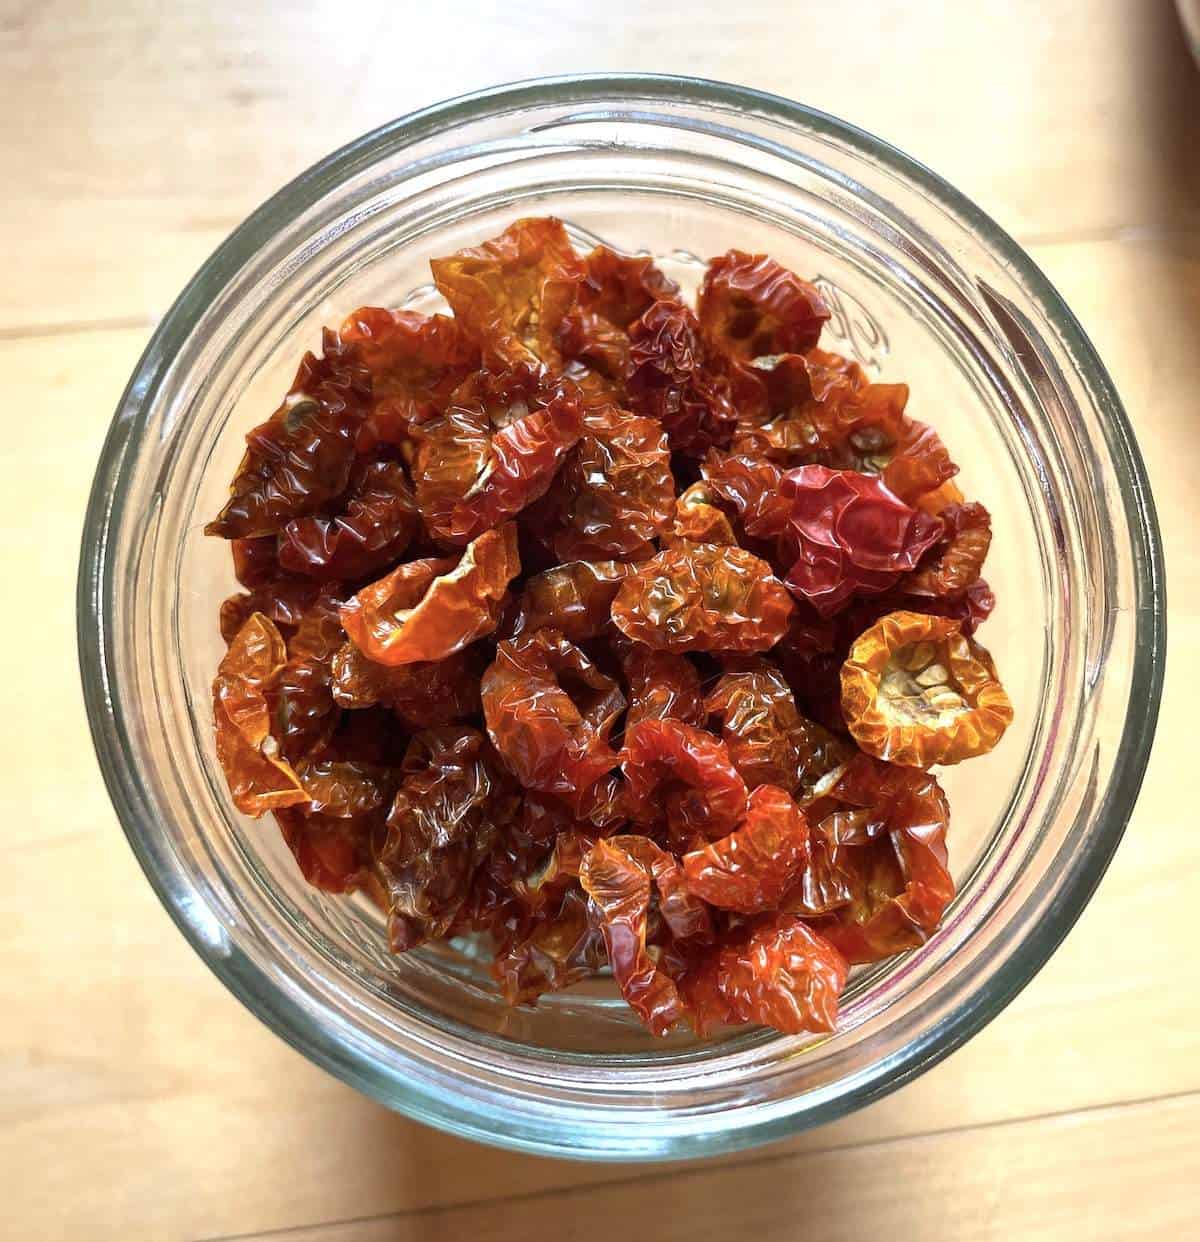 A jar filled with dehydrated cherry tomatoes.